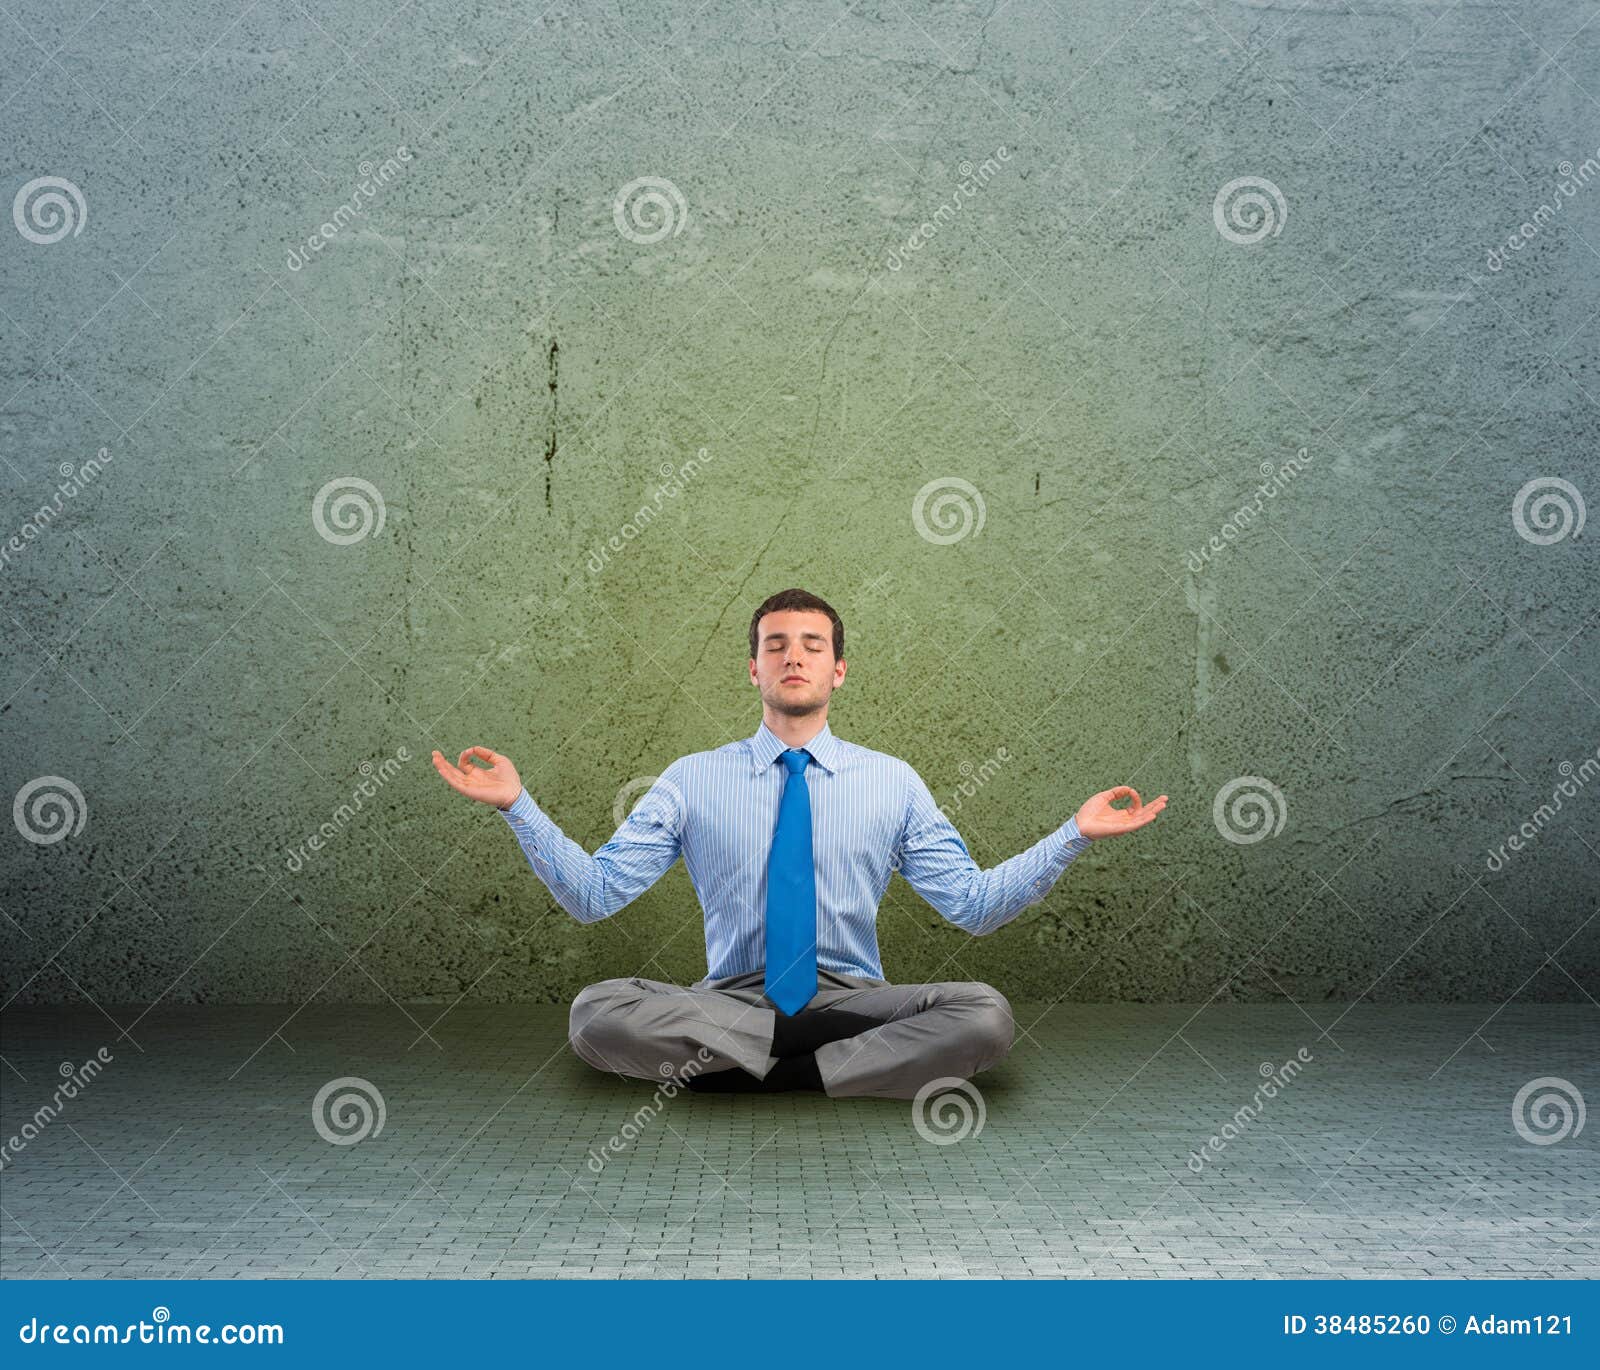 Image of a business man meditating on floor